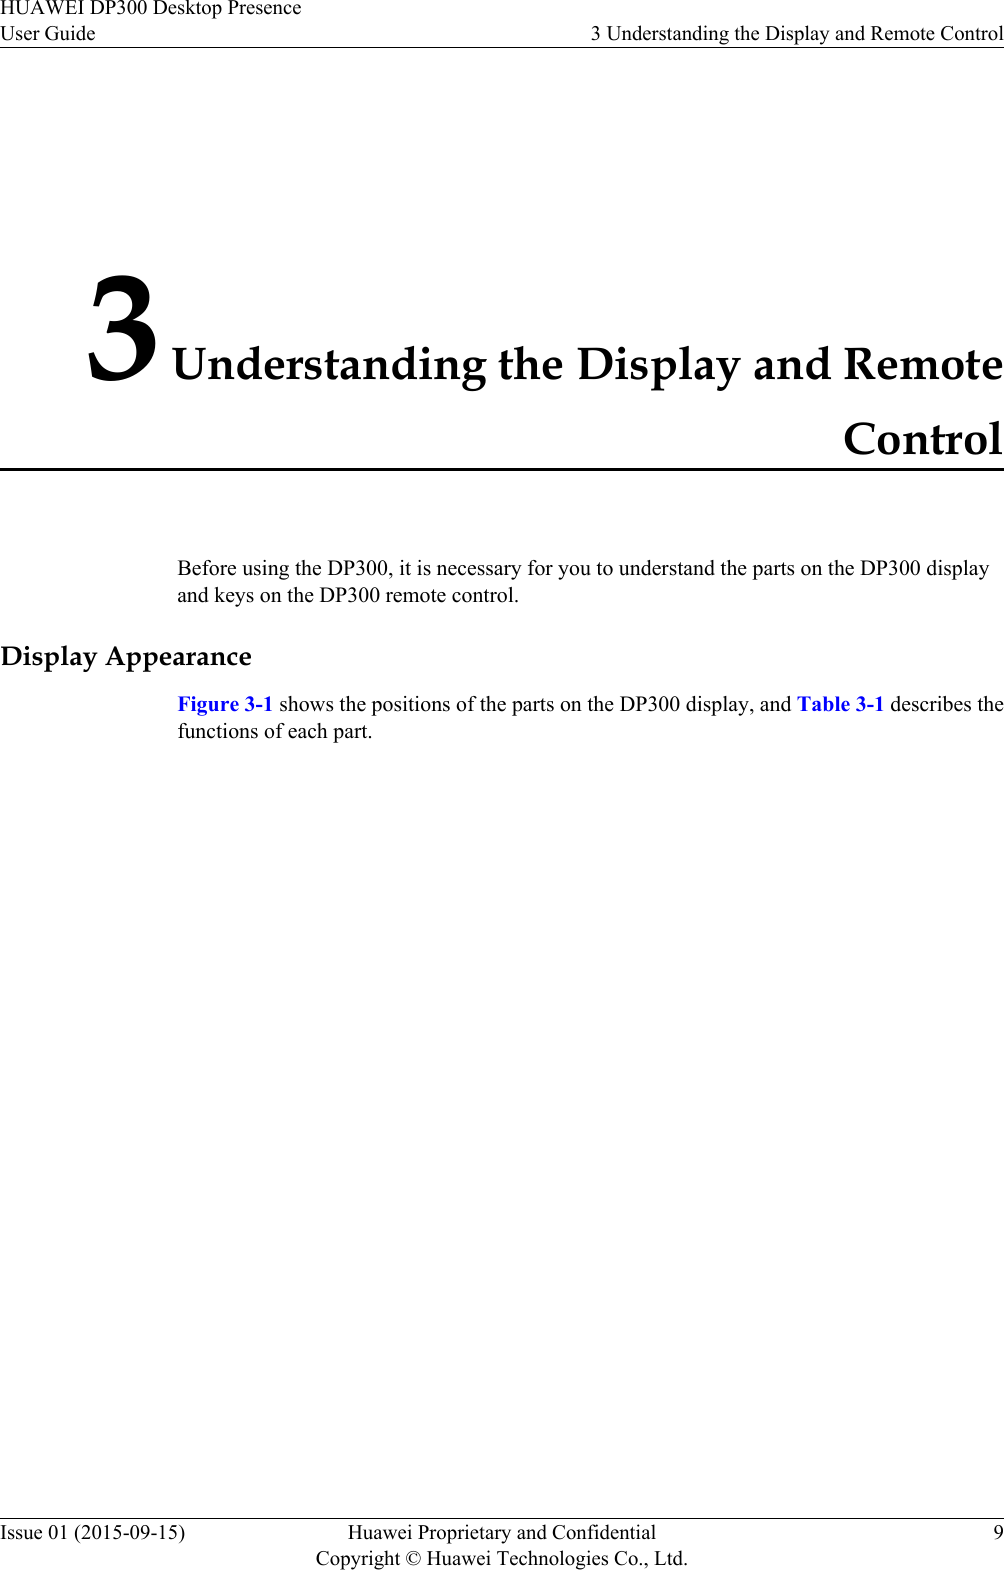 3 Understanding the Display and RemoteControlBefore using the DP300, it is necessary for you to understand the parts on the DP300 displayand keys on the DP300 remote control.Display AppearanceFigure 3-1 shows the positions of the parts on the DP300 display, and Table 3-1 describes thefunctions of each part.HUAWEI DP300 Desktop PresenceUser Guide 3 Understanding the Display and Remote ControlIssue 01 (2015-09-15) Huawei Proprietary and ConfidentialCopyright © Huawei Technologies Co., Ltd.9